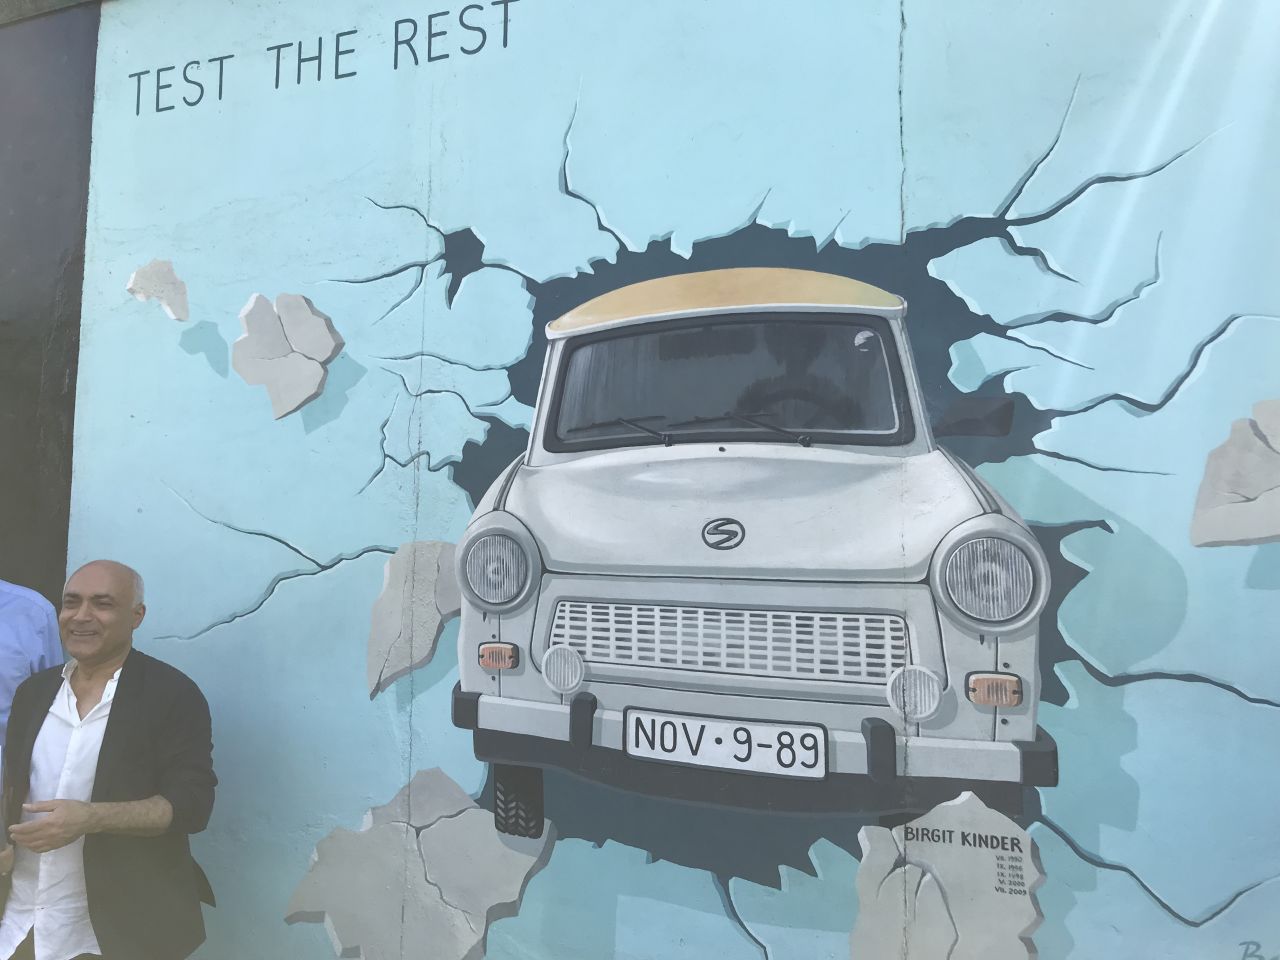 Alavi helped convince an East German artist to paint a now-famous image of her car driving through oppression.